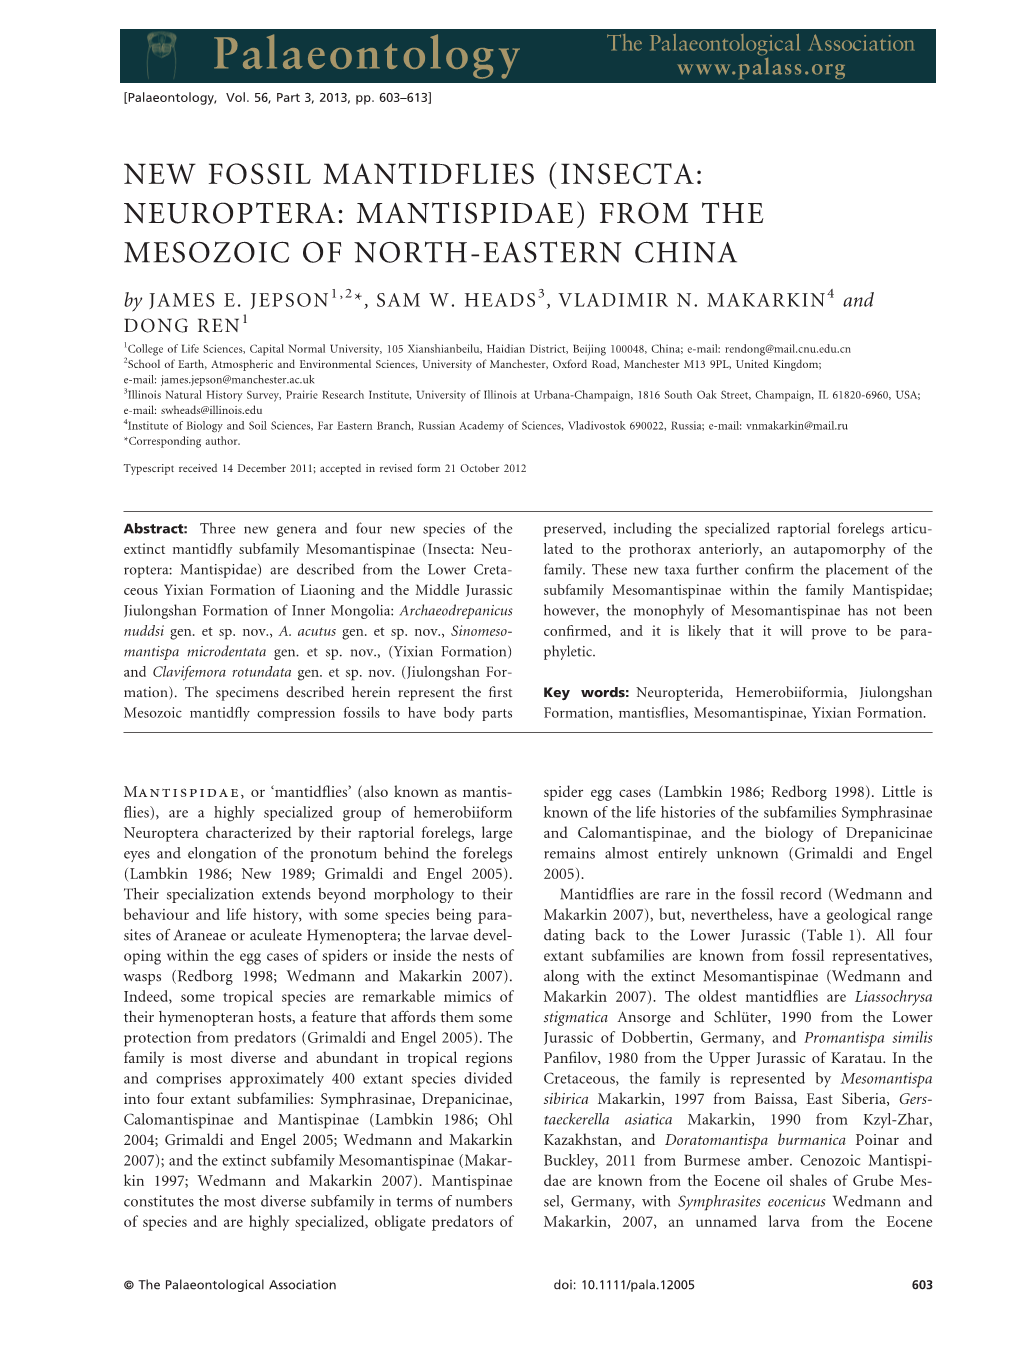 NEW FOSSIL MANTIDFLIES (INSECTA: NEUROPTERA: MANTISPIDAE) from the MESOZOIC of NORTH-EASTERN CHINA by JAMES E